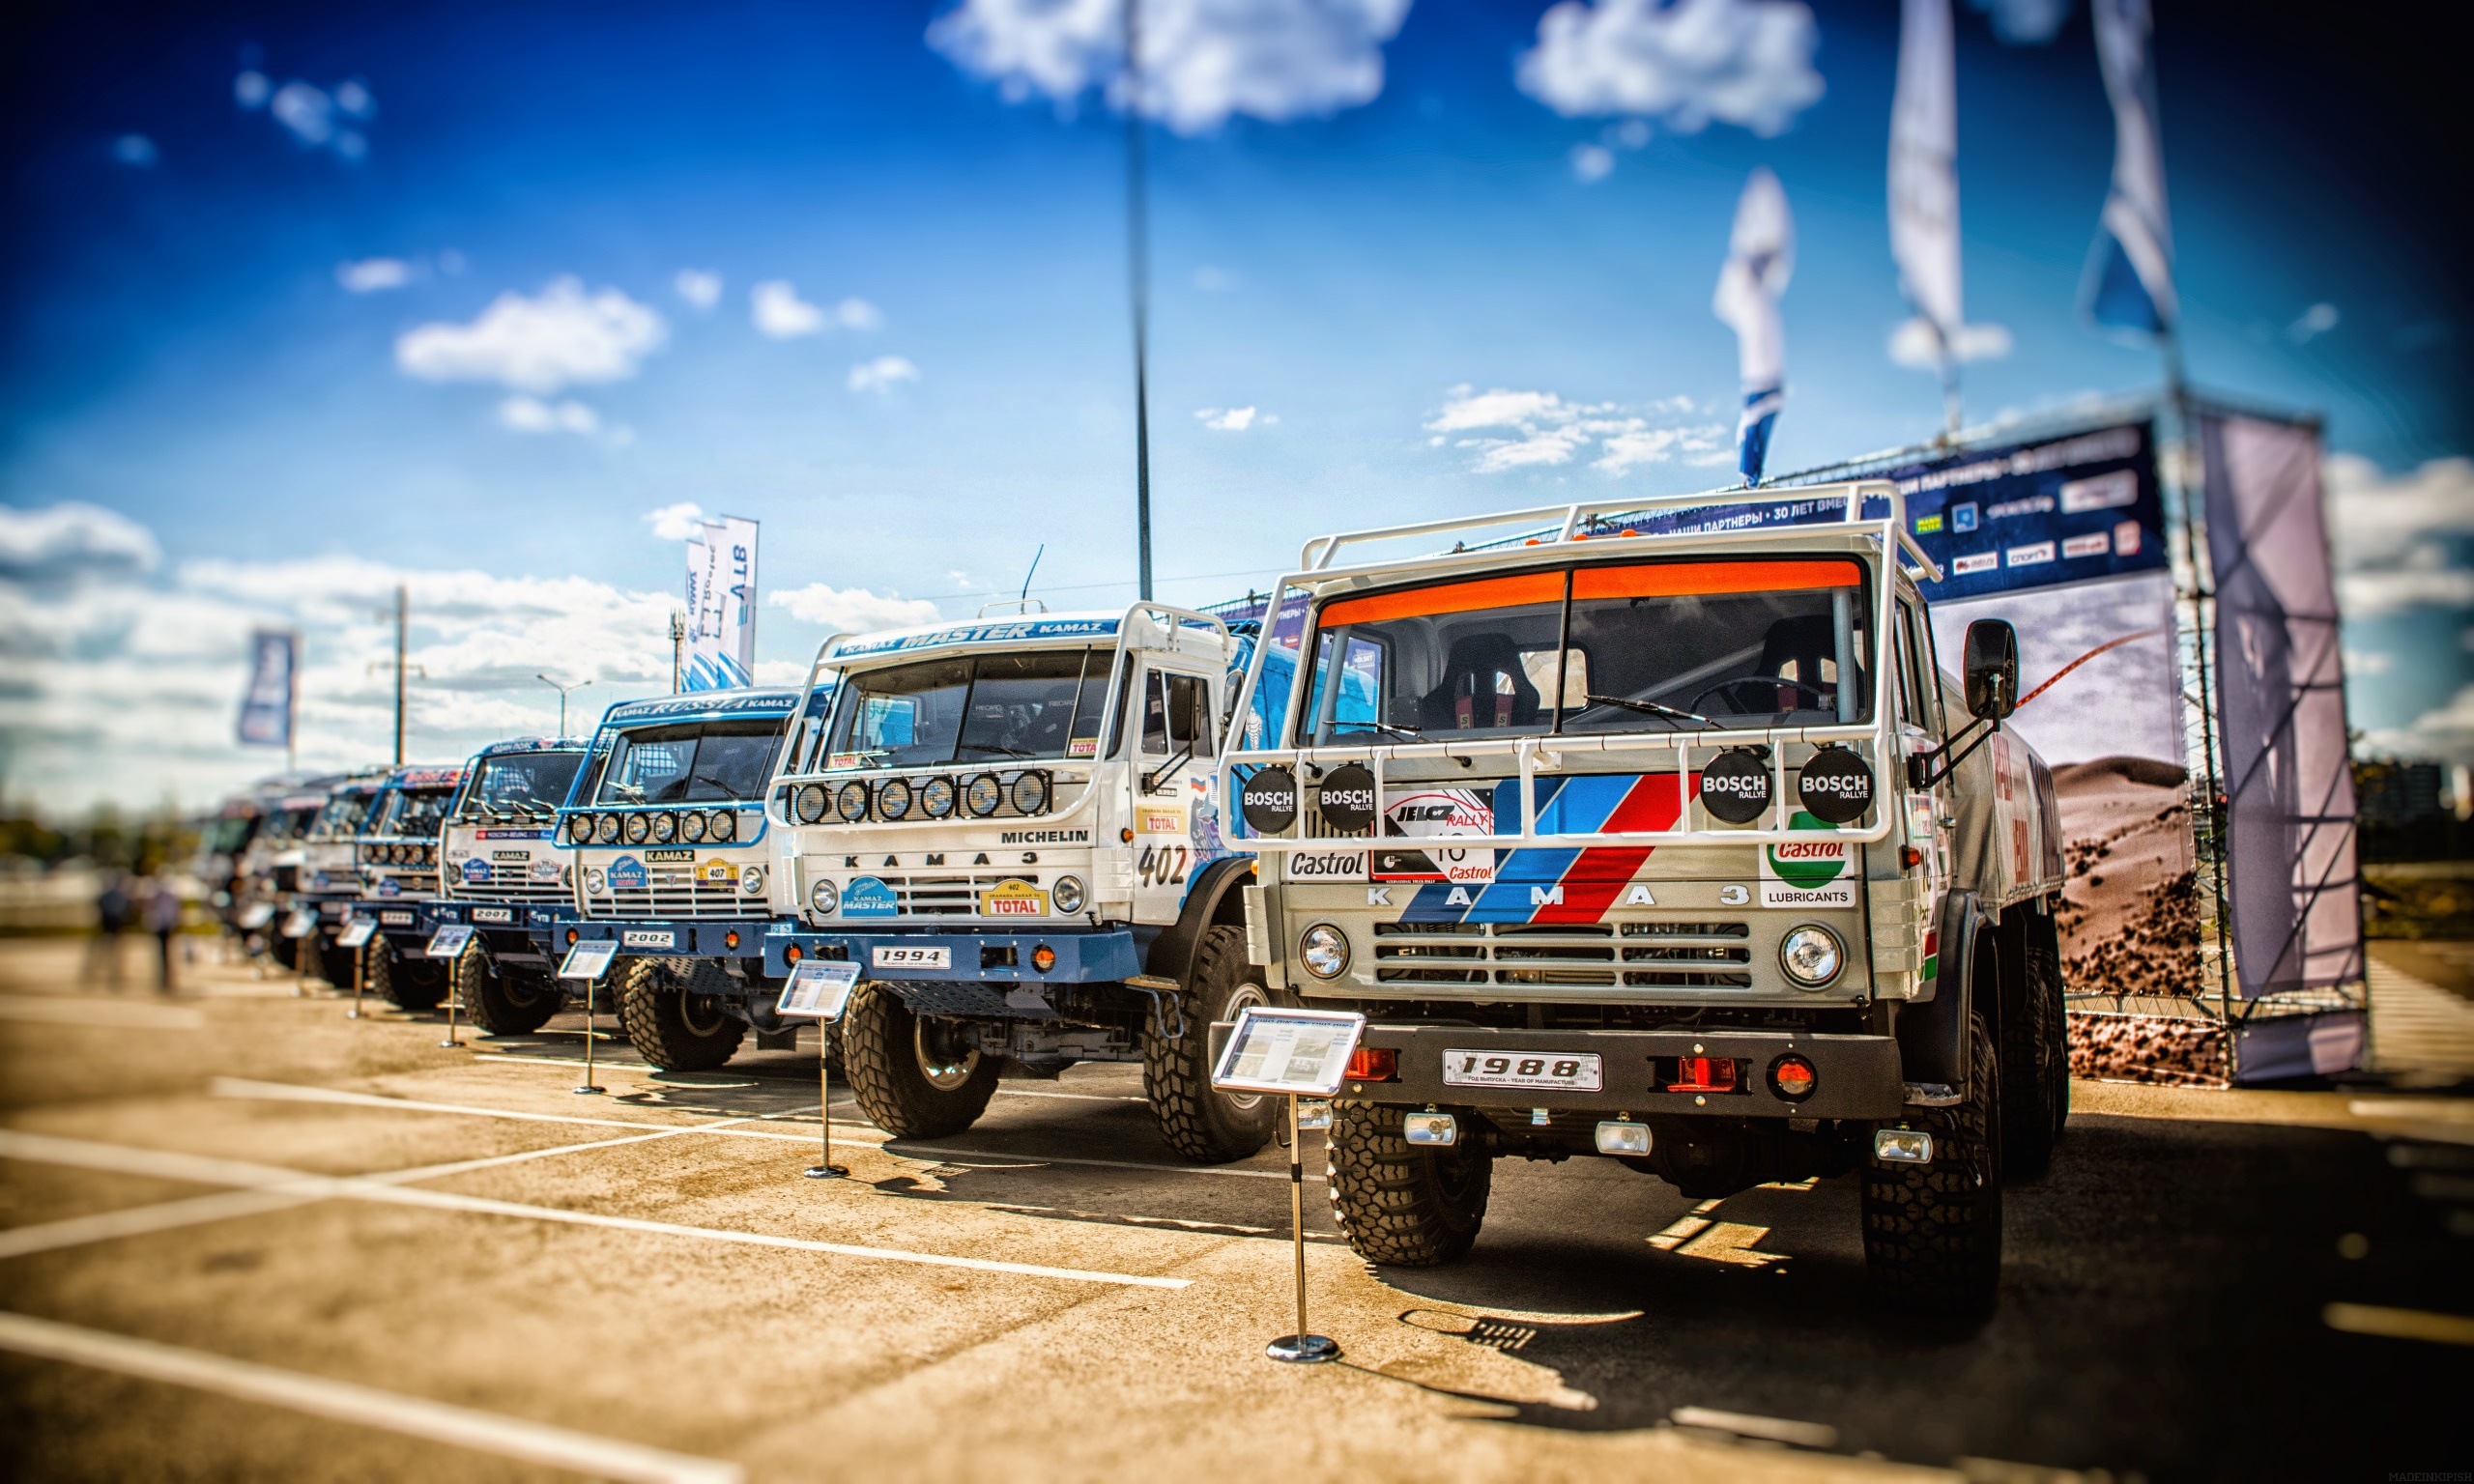 General 2560x1536 Rally truck vehicle clouds wheels Kamaz line-up Russian 1988 (year) 1994 (Year) 2002 (Year) 2007 (Year) museum history